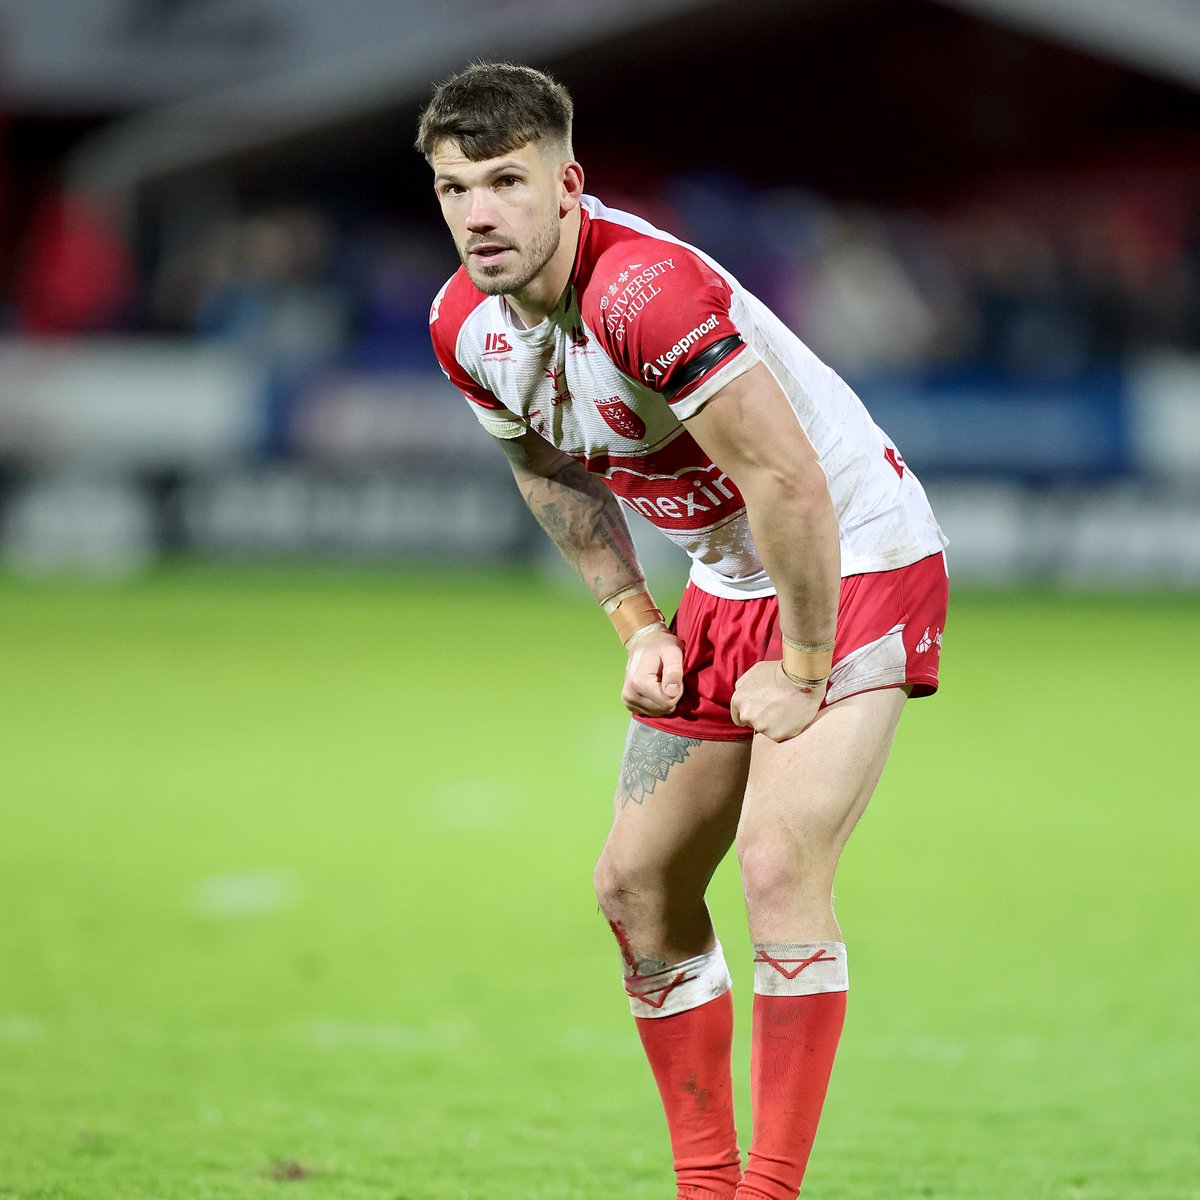 Hull KR can confirm Oliver Gildart sustained a knee injury during the warm up in last week’s win over St. Helens. The centre will require surgery and will miss approximately the next six weeks. Everyone wishes Oliver a speedy recovery.